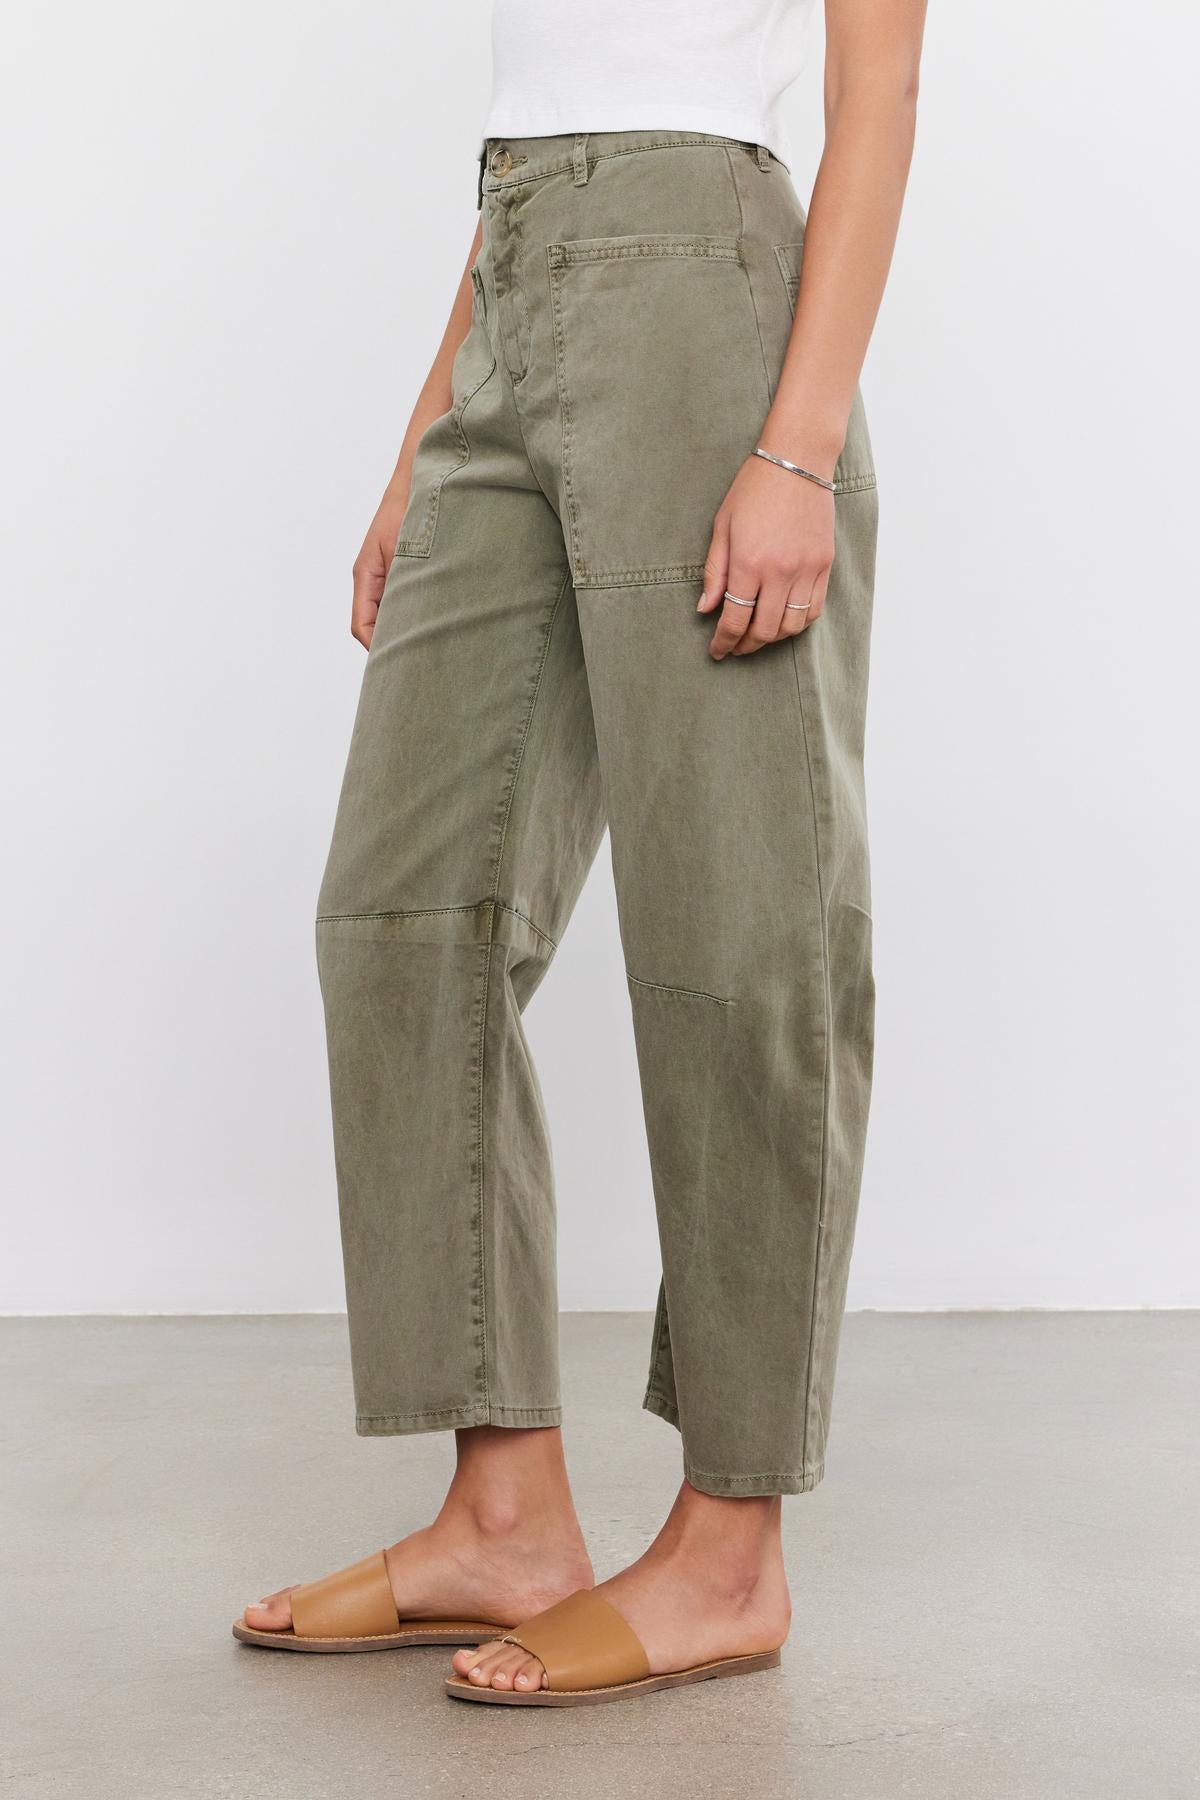 Woman standing in a side profile view wearing Velvet by Graham & Spencer BRYLIE SANDED TWILL UTILITY PANT trousers and tan slide sandals on a white background.-37000518107329